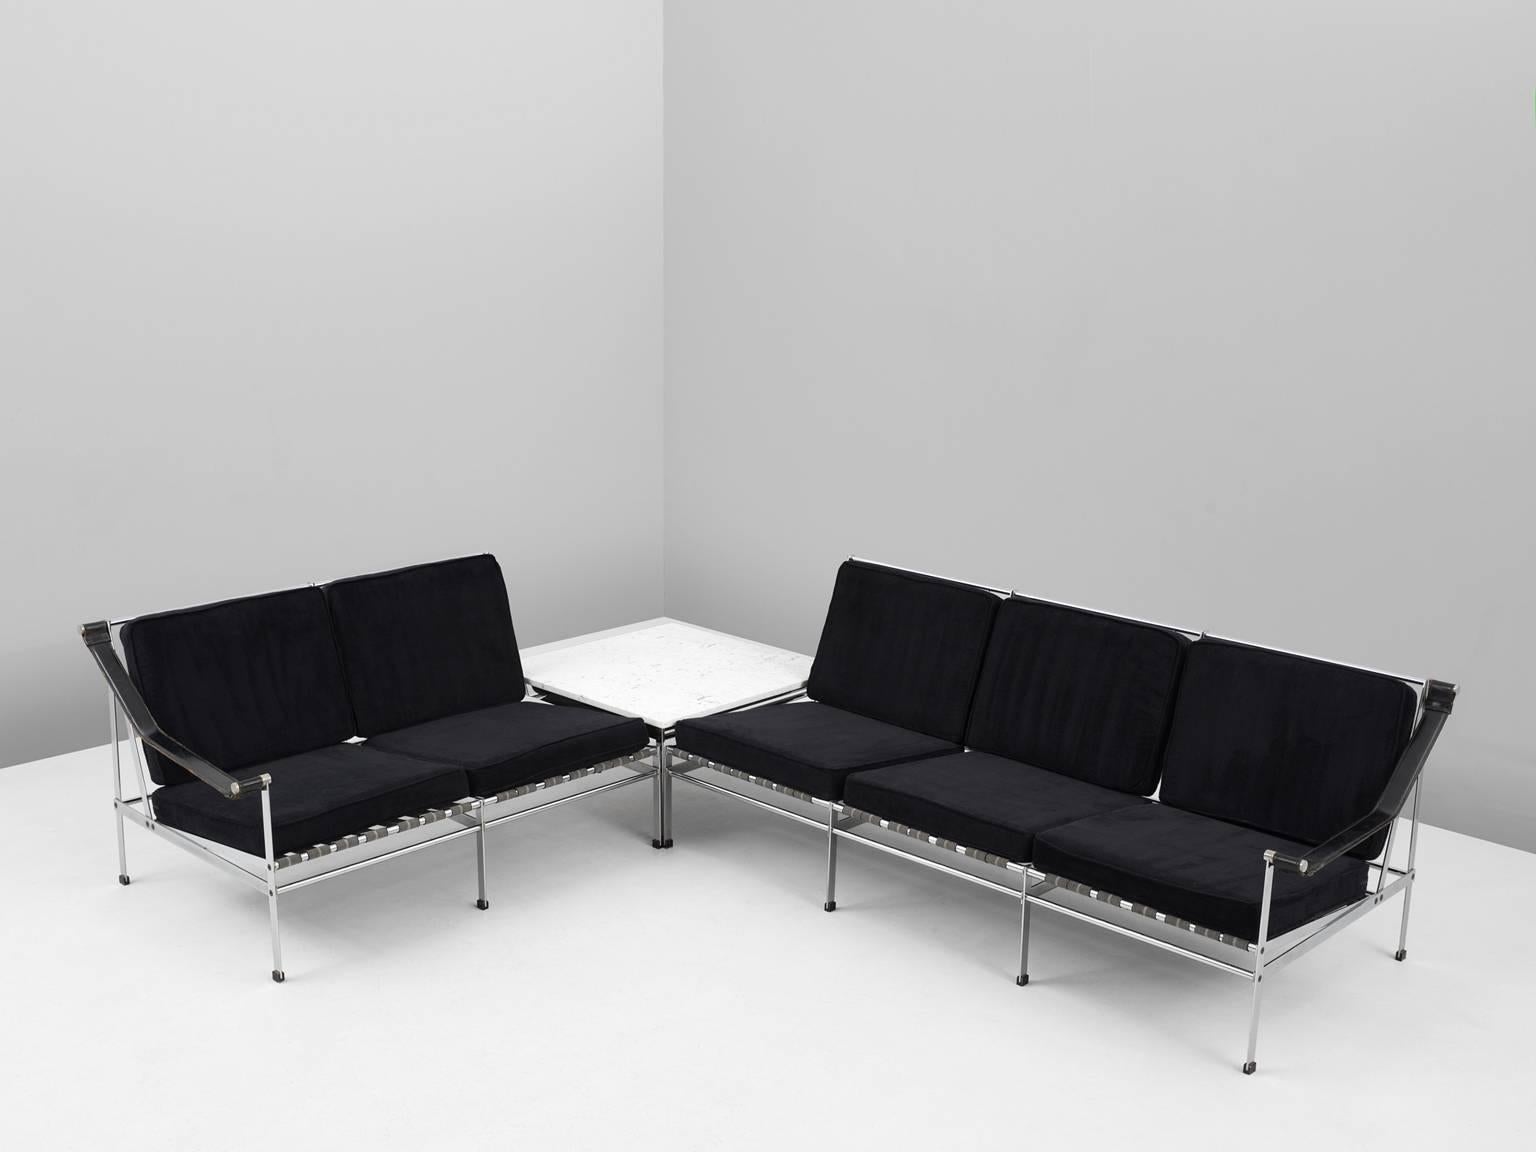 European Set of Two Mid-Century Sofa's and Table in Chrome and Marble